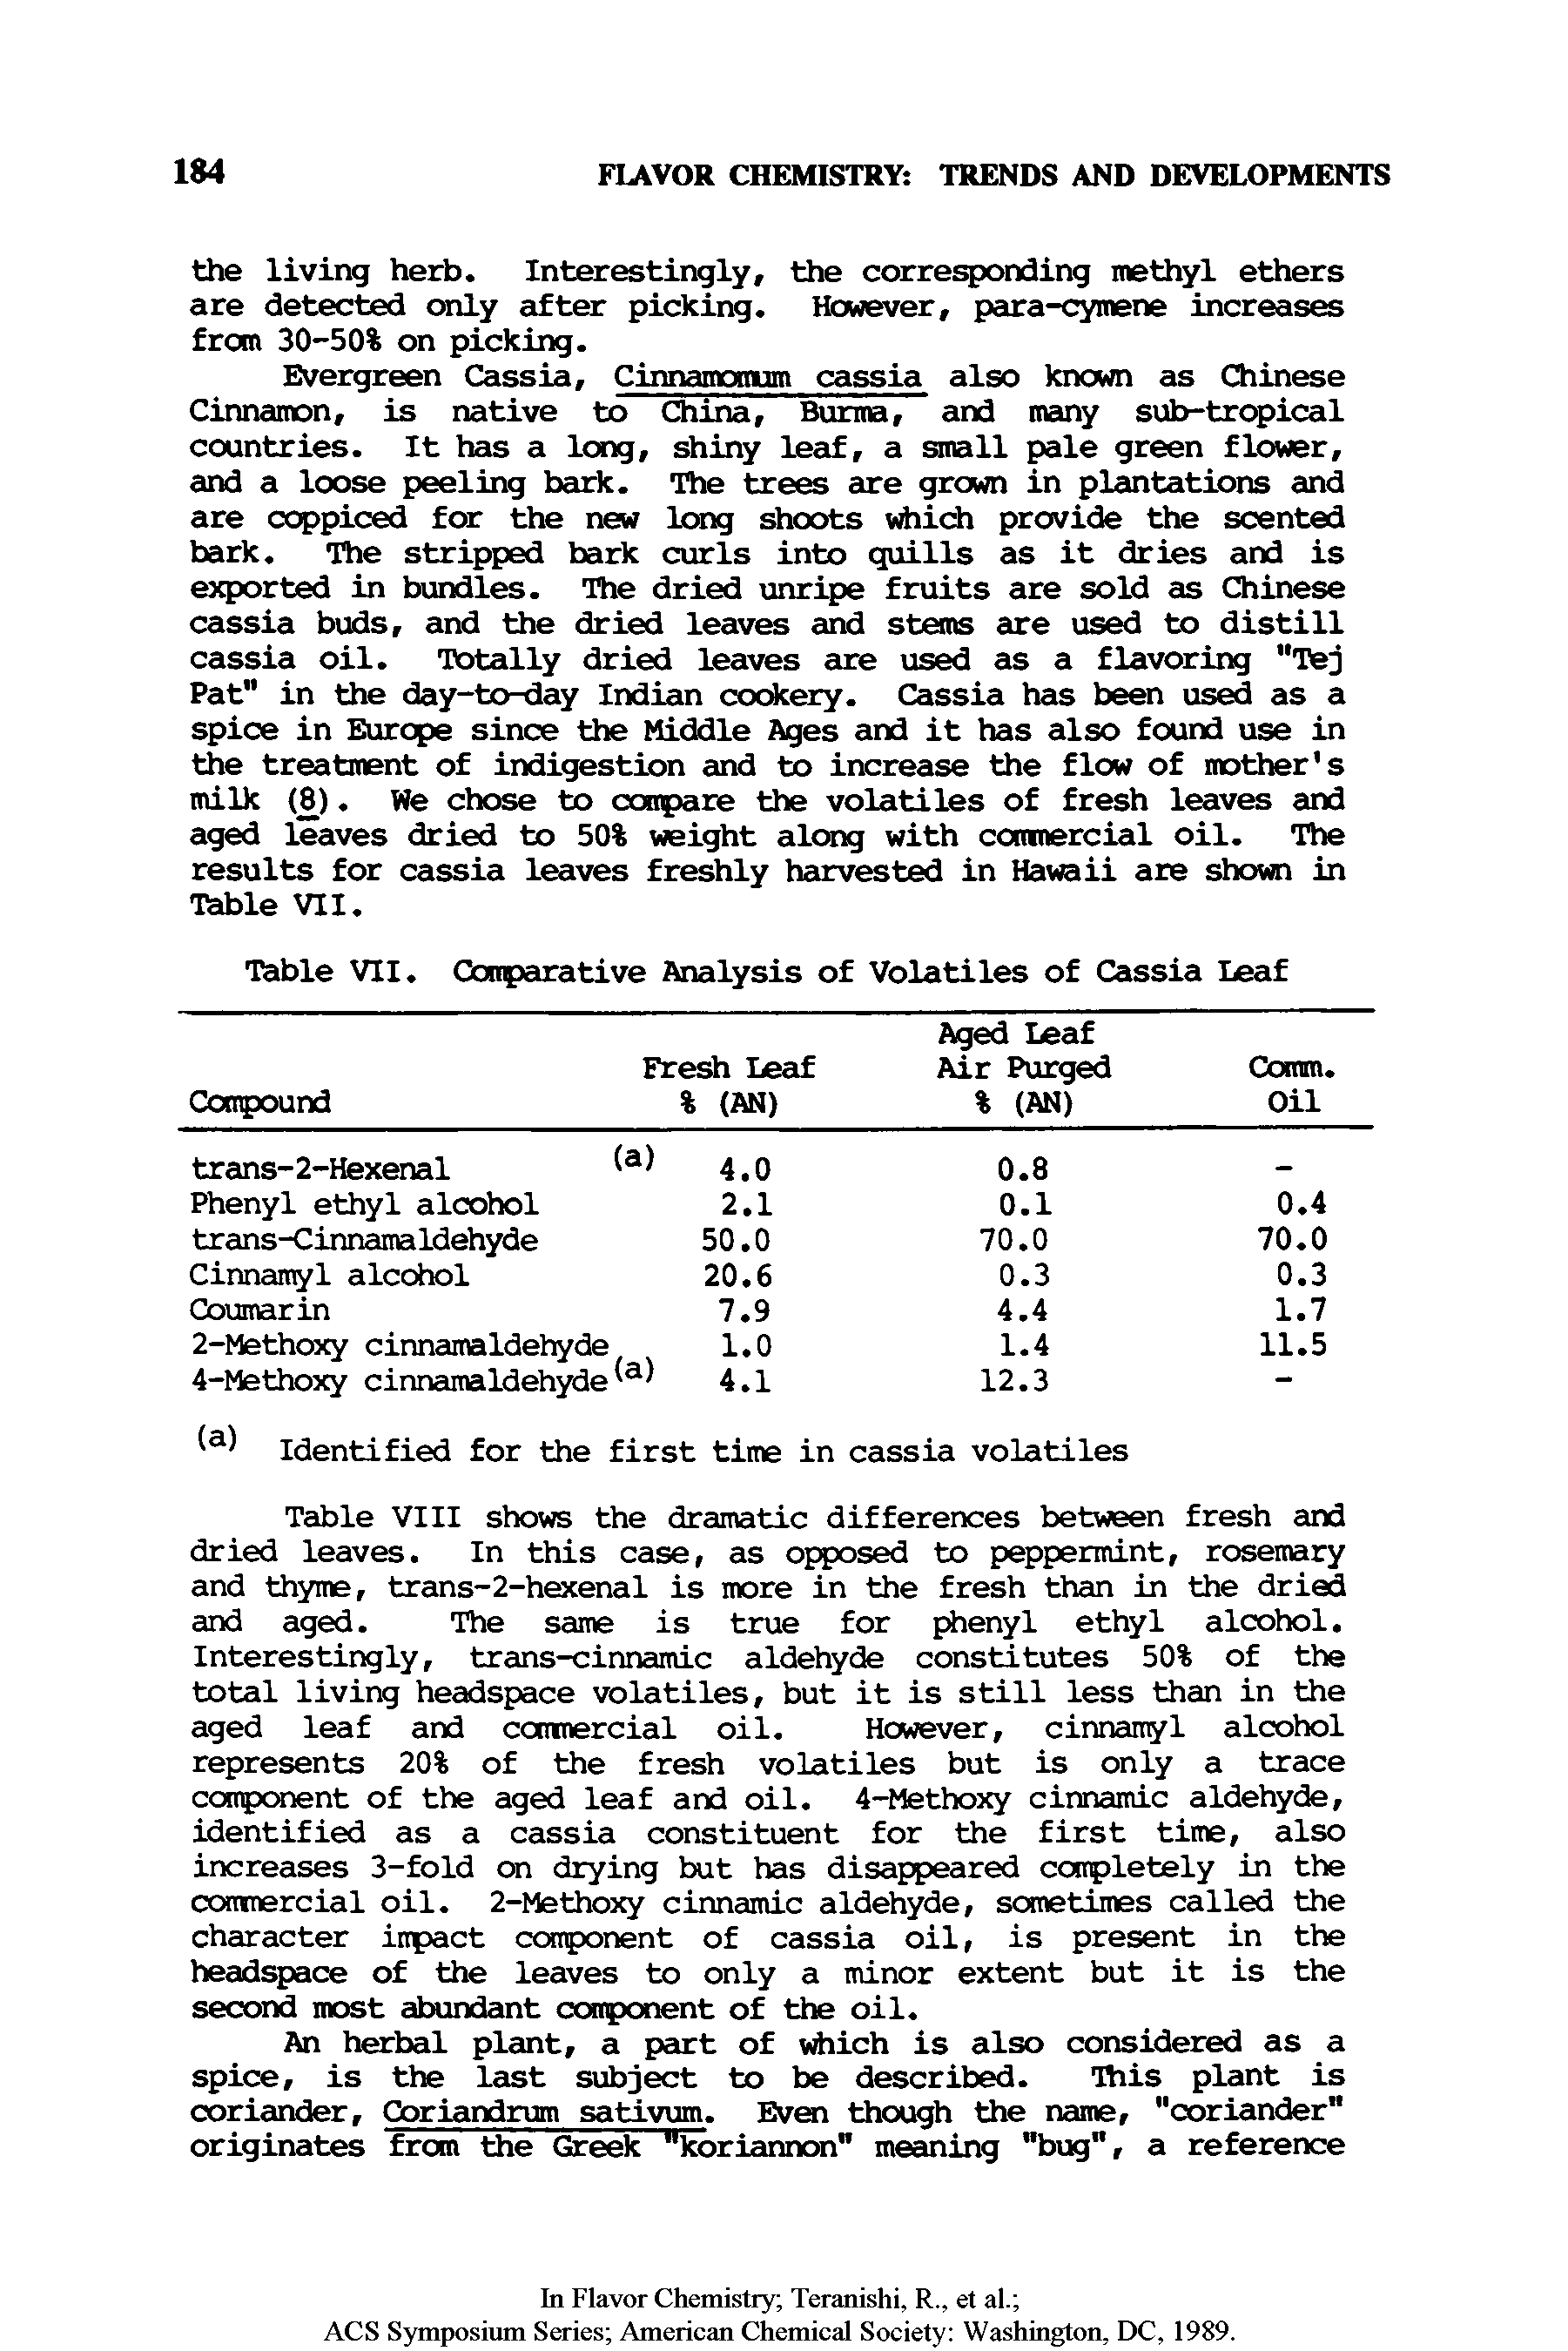 Table VIII shows the dramatic differences between fresh and dried leaves. In this case, as oj sed to peppermint, rosemary and thyme, trans-2-hexenal is more in the fresh than in the dried and aged. The same is true for phenyl ethyl alcohol. Interestingly, trans-cinnamic aldehyde constitutes 50% of the total living headspace volatiles, but it is still less than in the aged leaf and commercial oil. However, cinnaniyl alcohol represents 20% of the fresh volatiles but is only a trace conpcanent of the aged leaf and oil. 4-Methoxy cinnamic aldehyde, identified as a cassia constituent for the first time, also increases 3-fold on drying but has disappeared completely in the comtnercial oil. 2-Methoxy cinnamic aldehyde, sometimes called the character impact component of cassia oil, is present in the headspace of the leaves to only a minor extent but it is the second most abundant component of the oil.